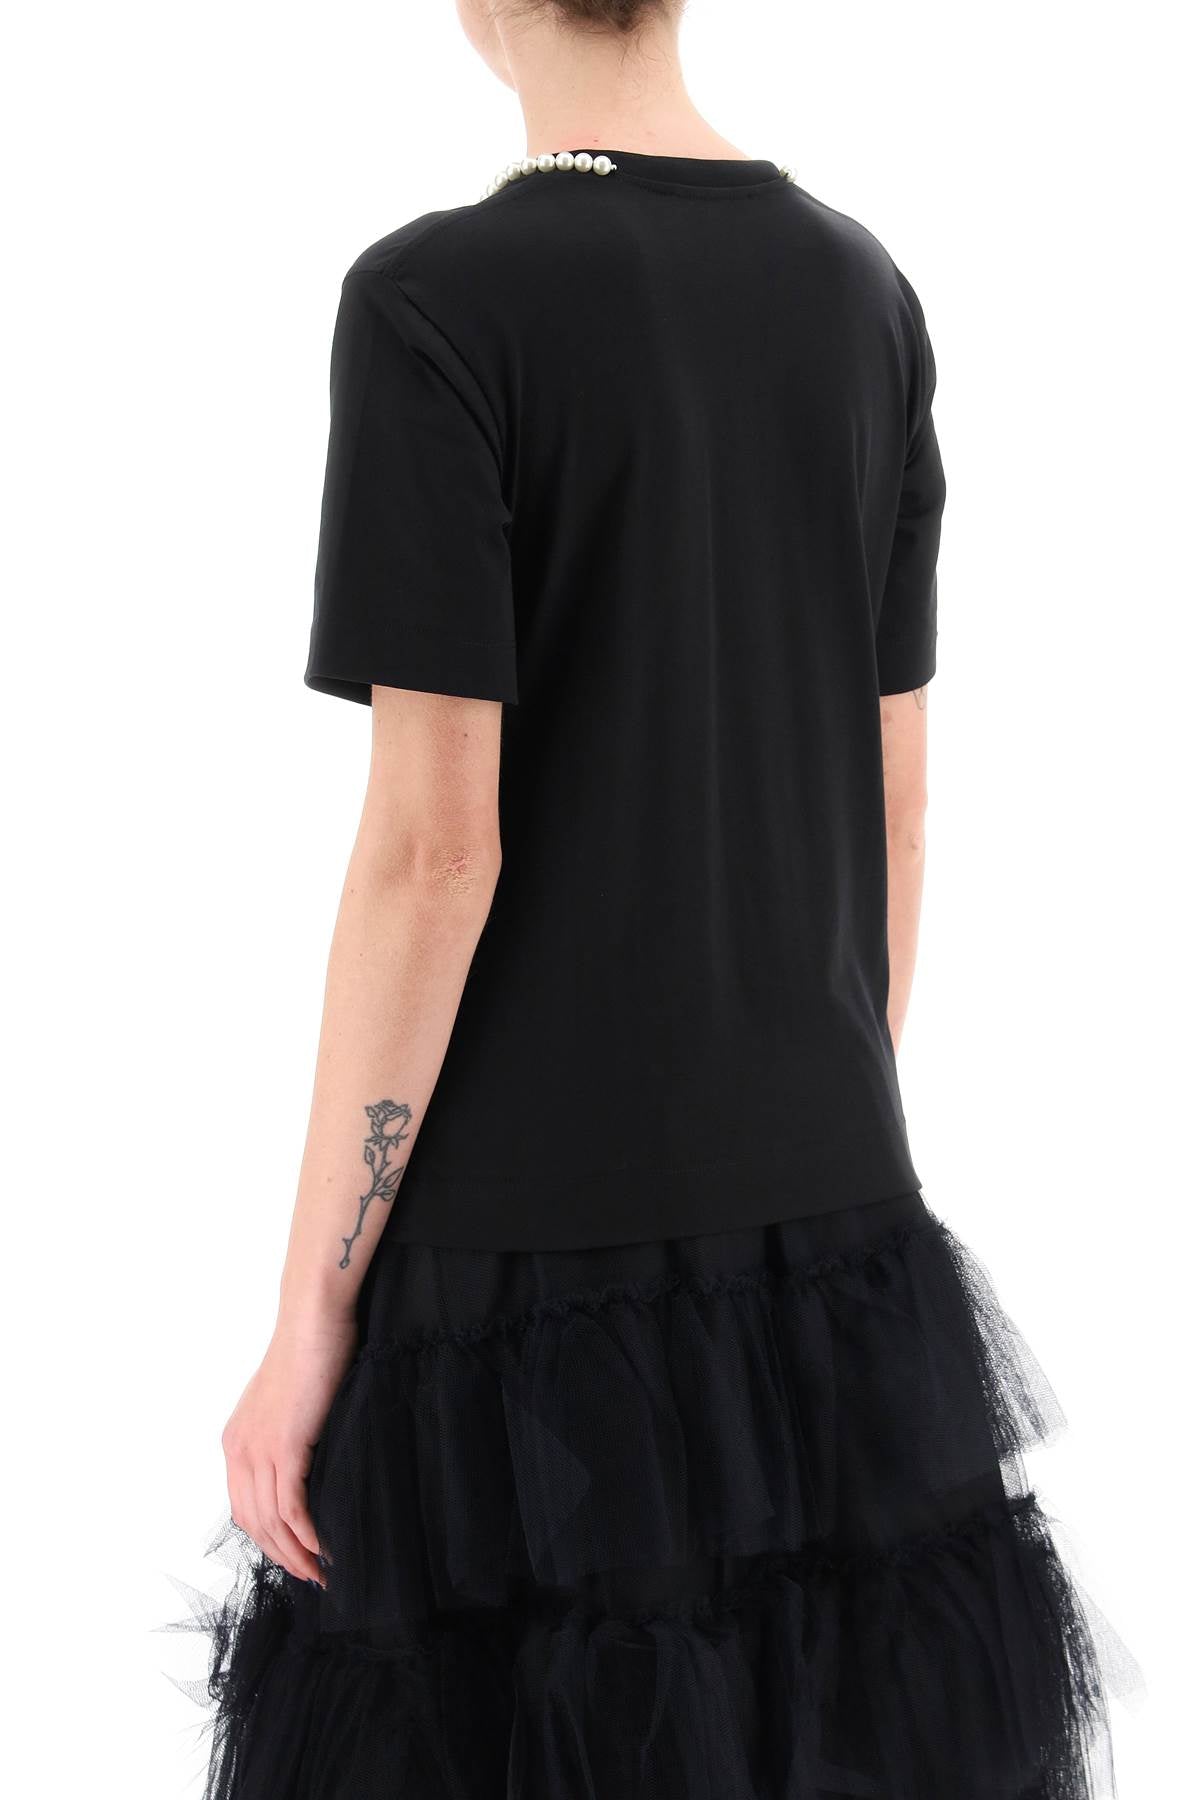 Simone Rocha Simone rocha t-shirt with heart-shaped cut-out and pearls